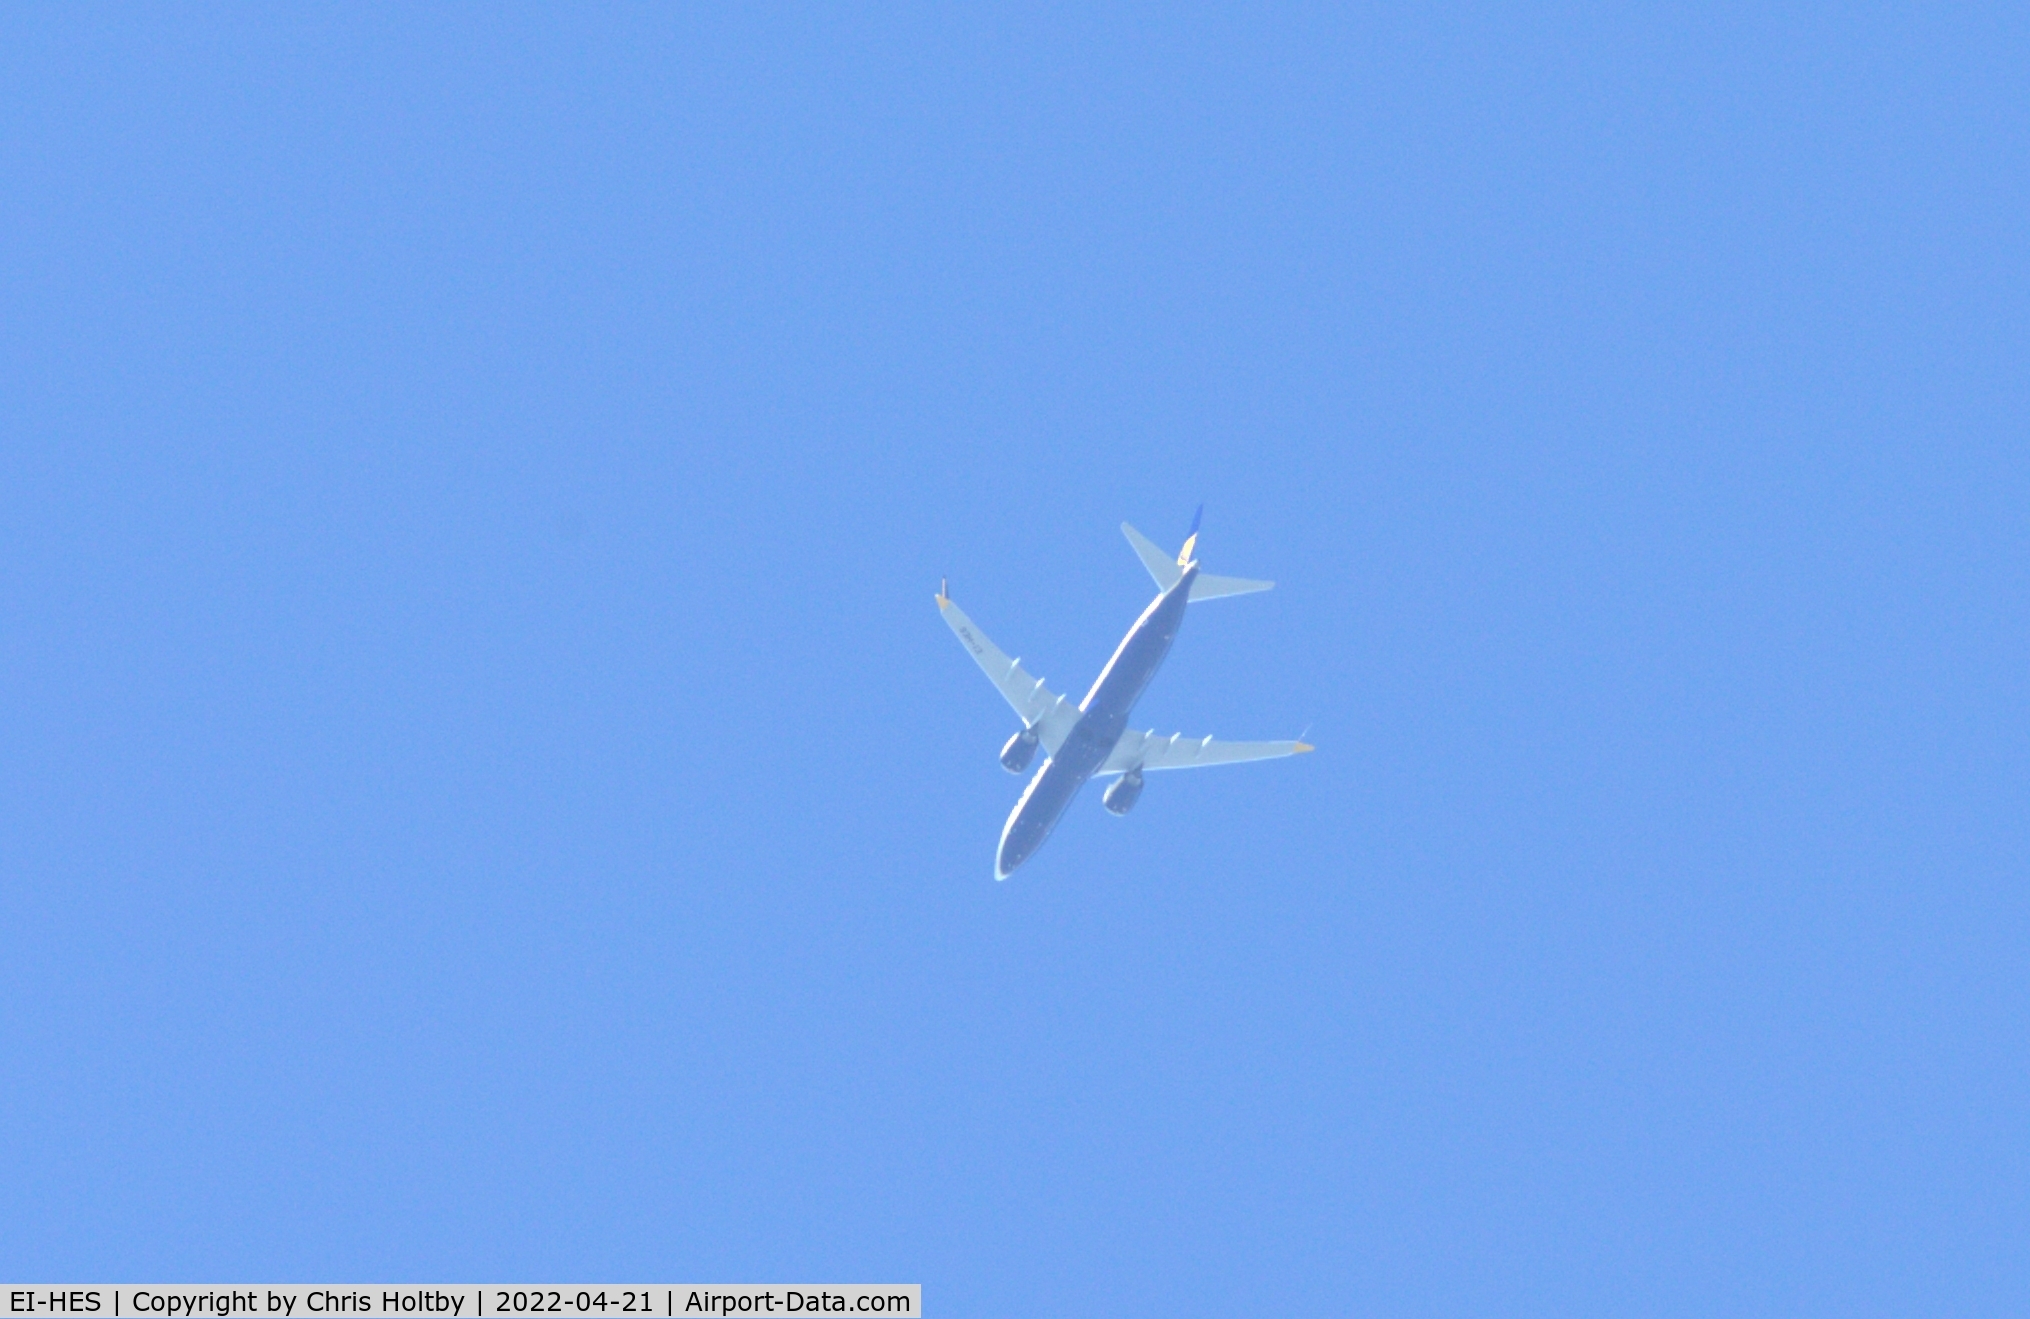 EI-HES, 2019 Boeing 737-8-200 MAX C/N 62306, Over Potters Bar, Herts on its way into Stansted Airport